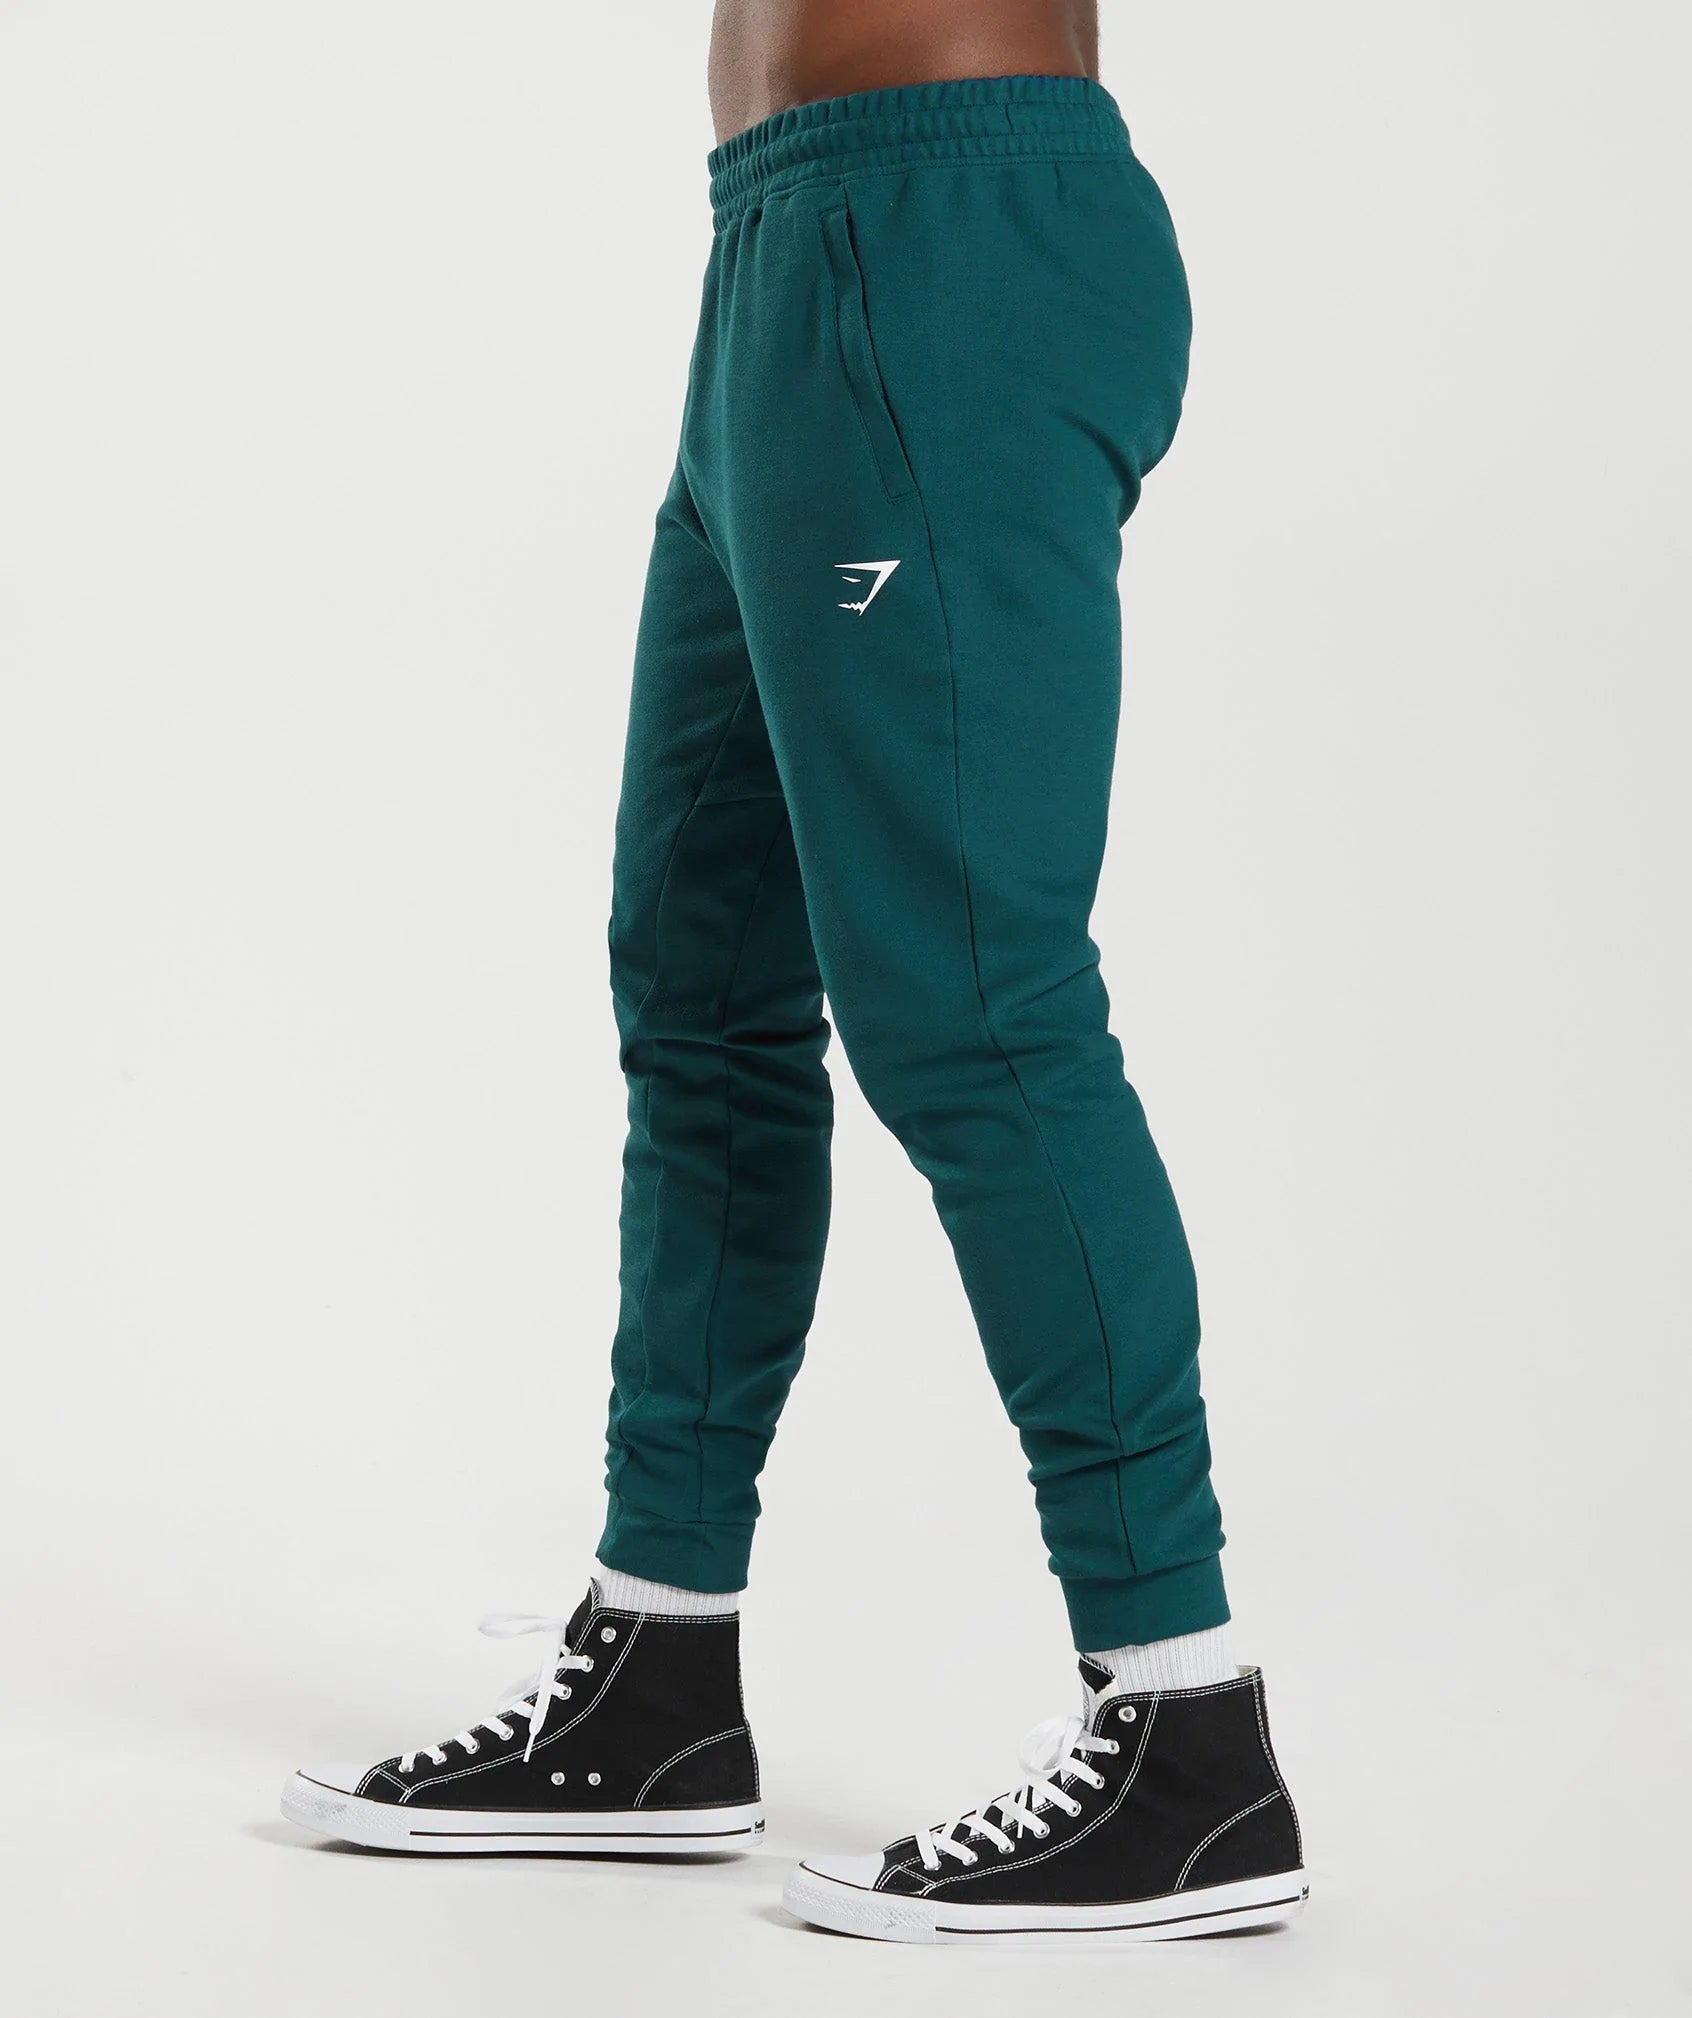 React Joggers in Winter Teal - view 3